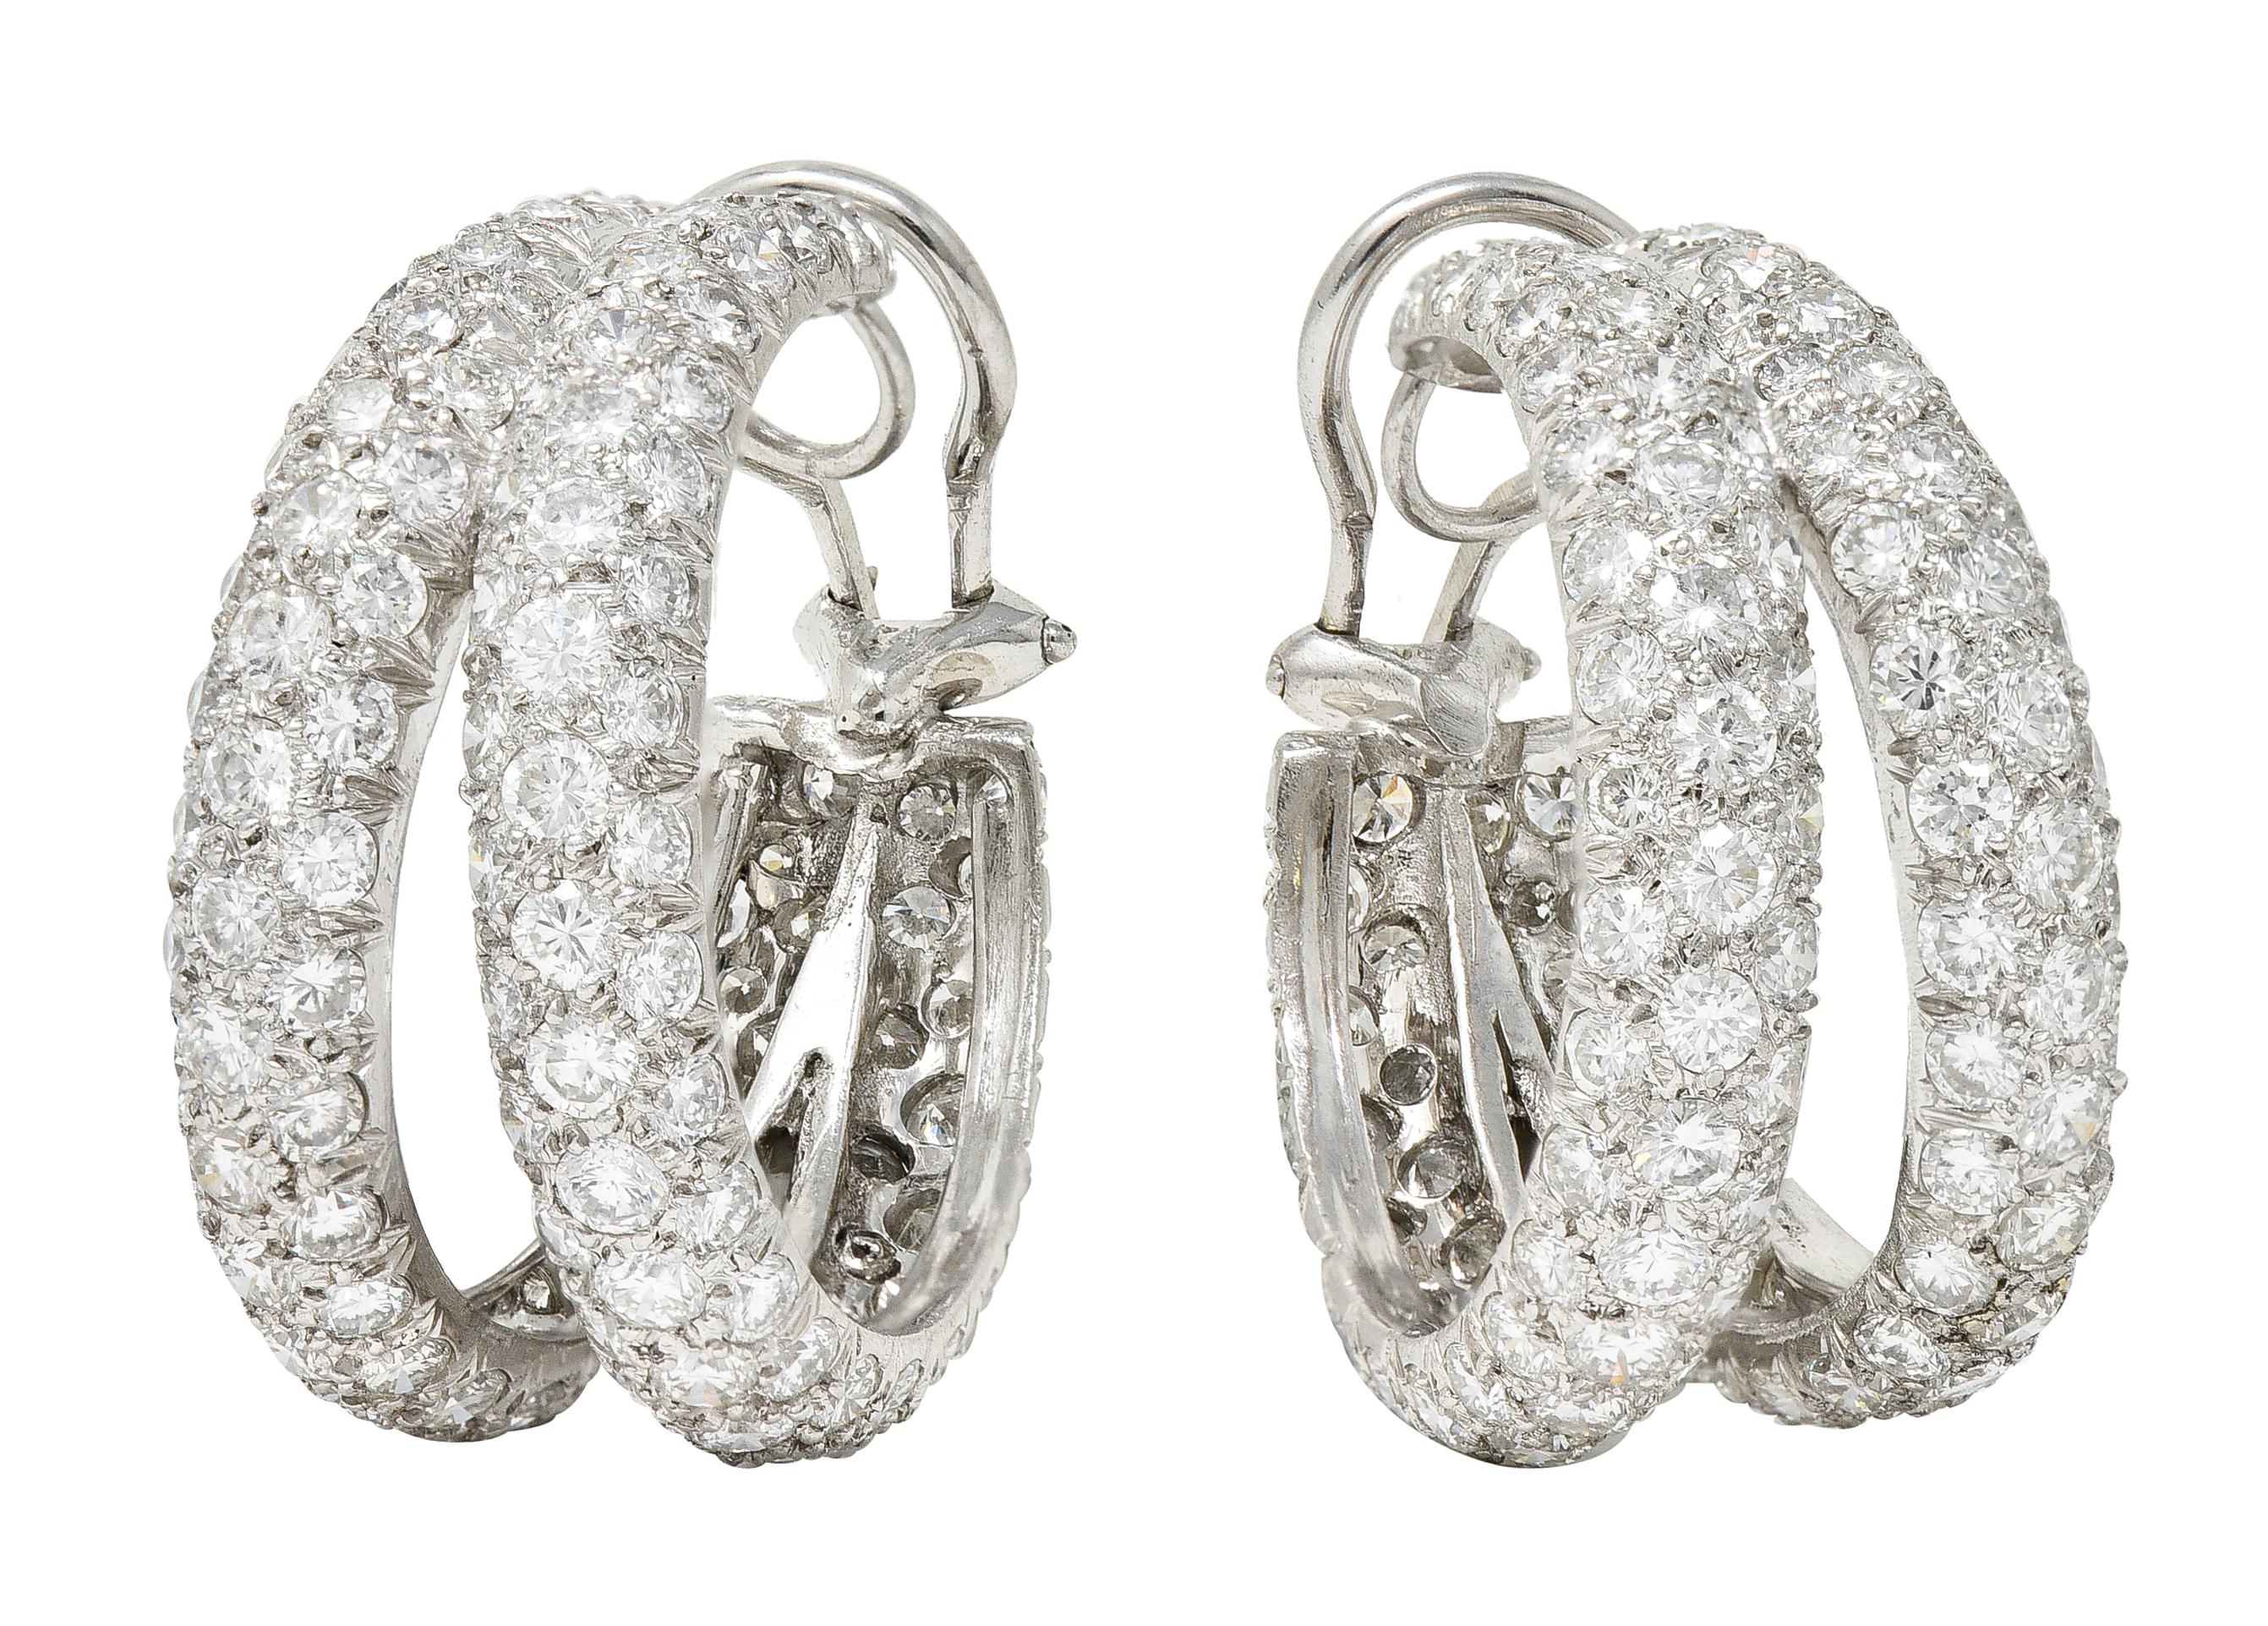 Ear-clip earrings are designed as substantial hoops in a split motif. Pavè set throughout by round brilliant cut diamonds. Weighing in total approximately 13.00 carats - F/G color with VS clarity. Completed by hinged omega backs. Inscribed PLAT for